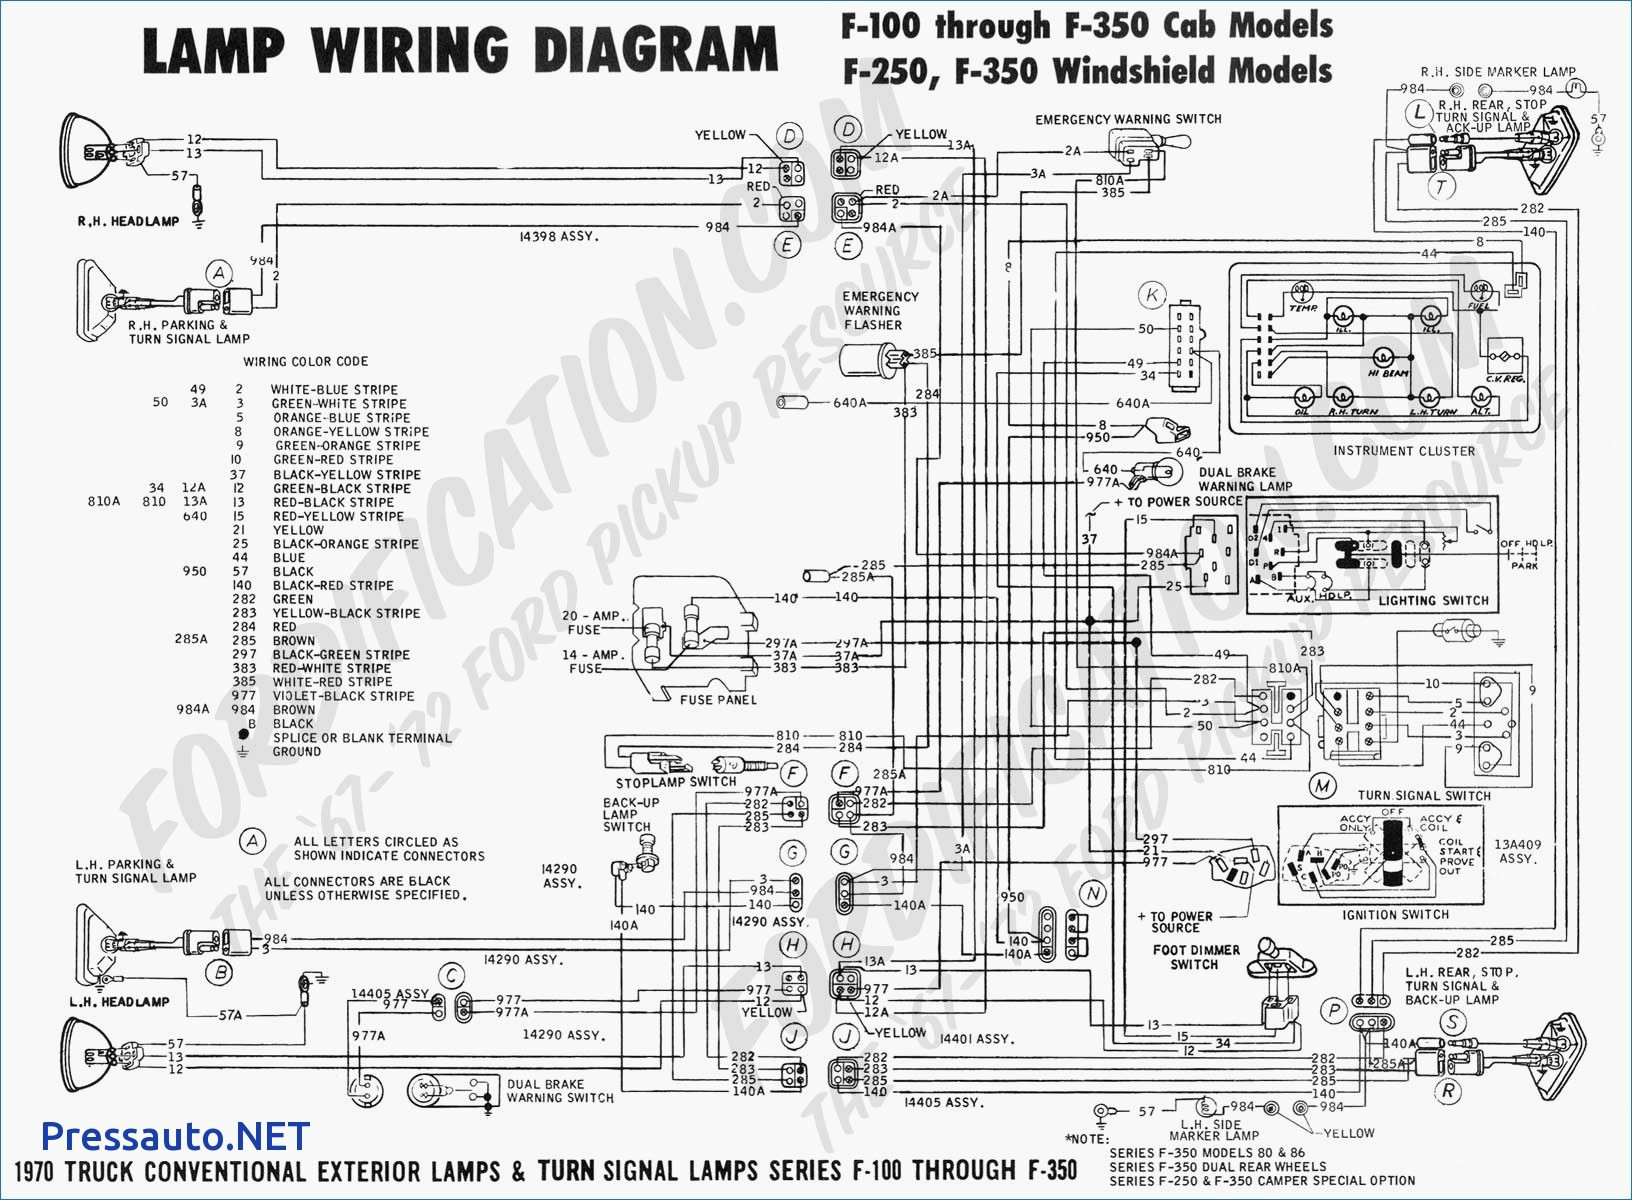 Wiring Diagram Pressure Switch Awesome Wiring Diagram for Pressure Switch New Mass Air Flow Sensor Wiring